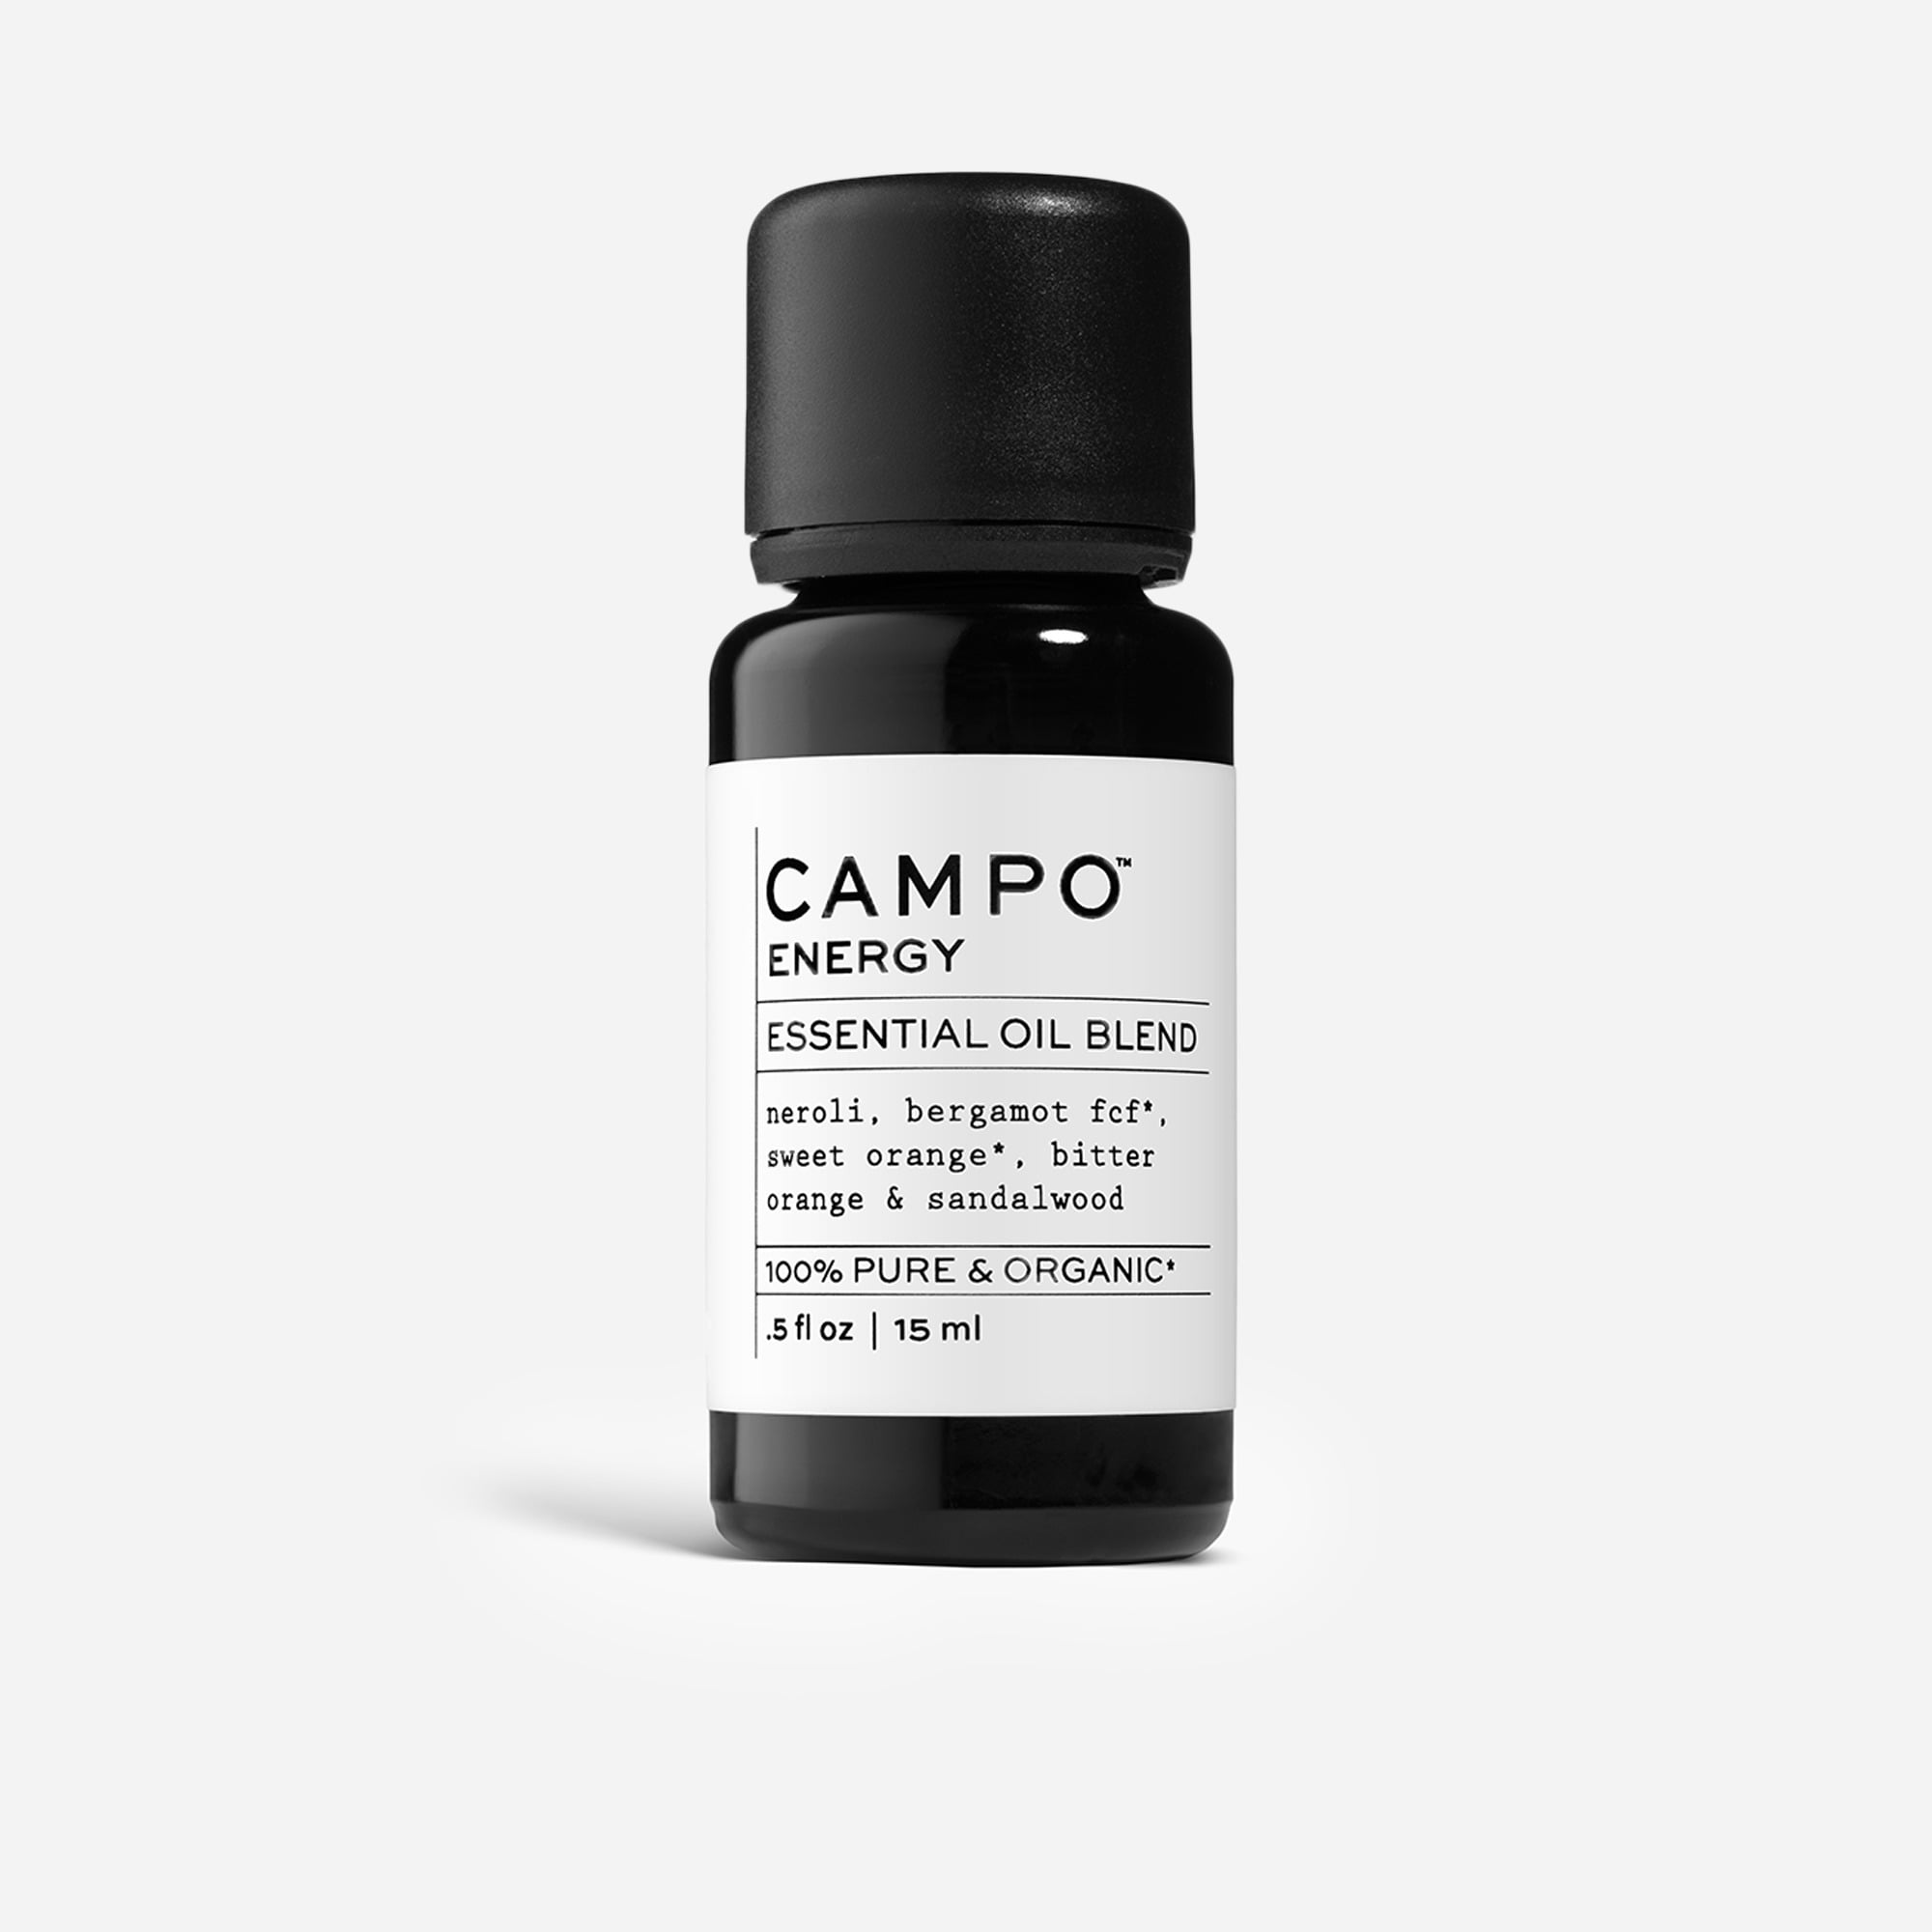 Jcrew CAMPO ENERGY pure essential oil blend